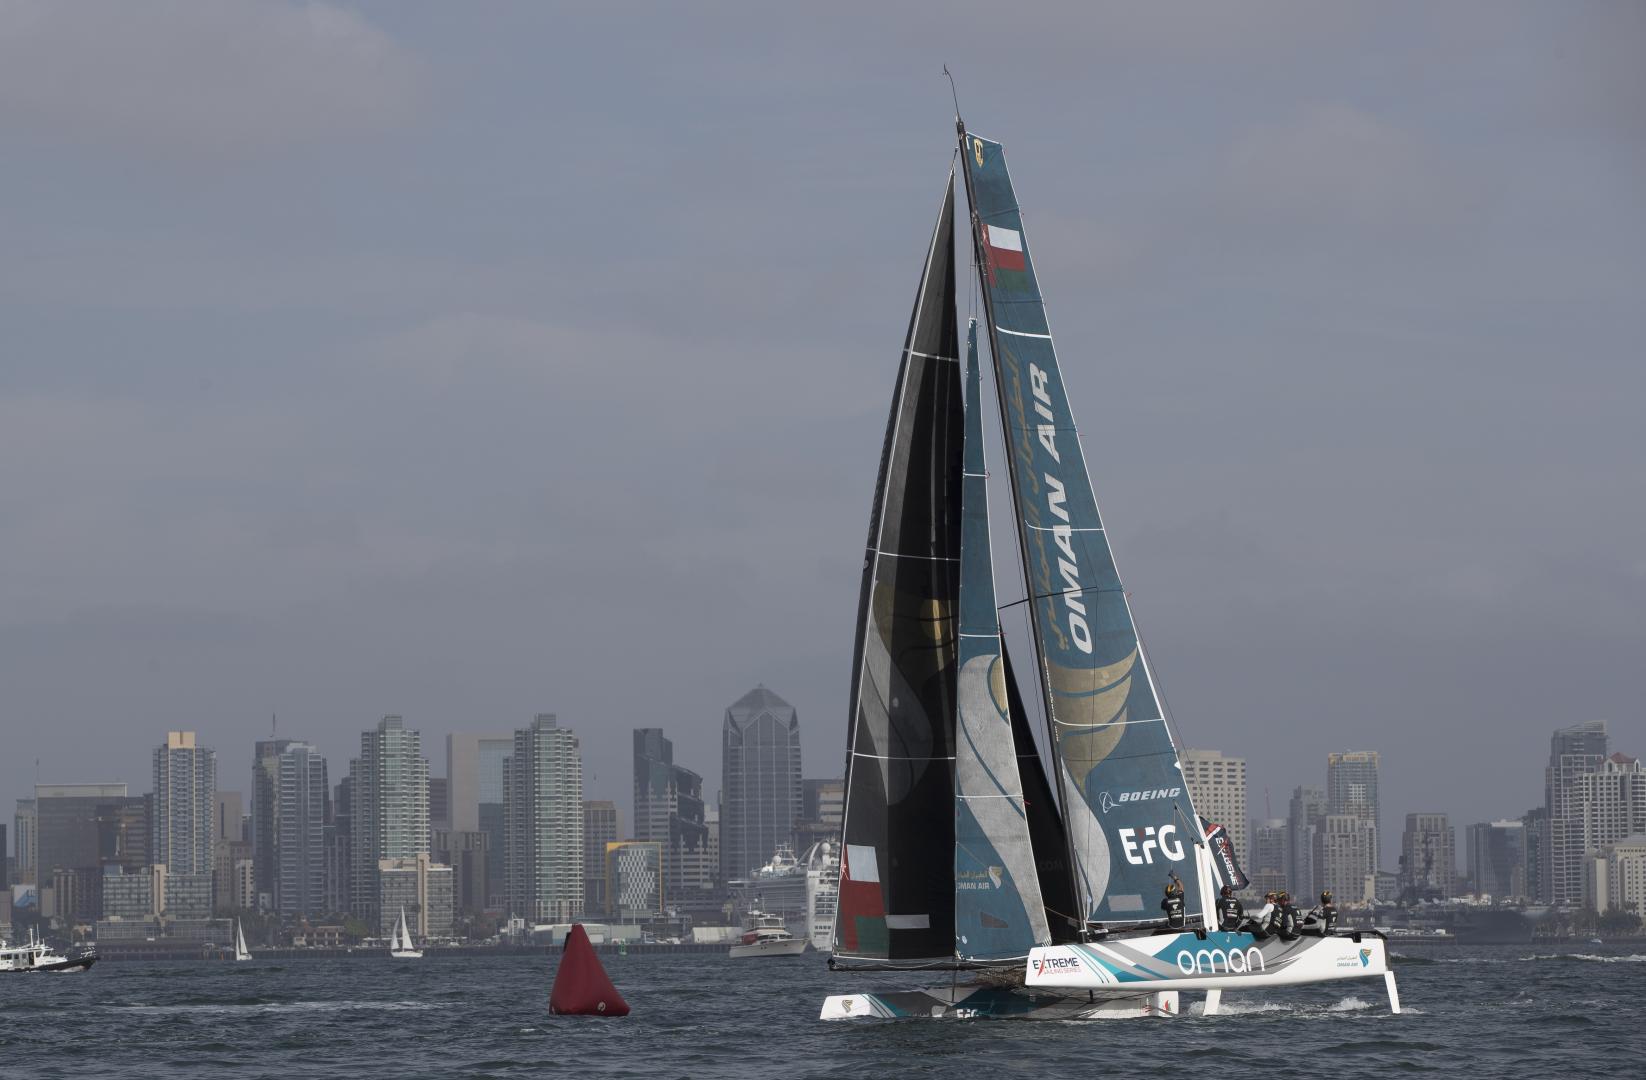 Oman Air crew on Extreme Sailing Series San Diego opening day